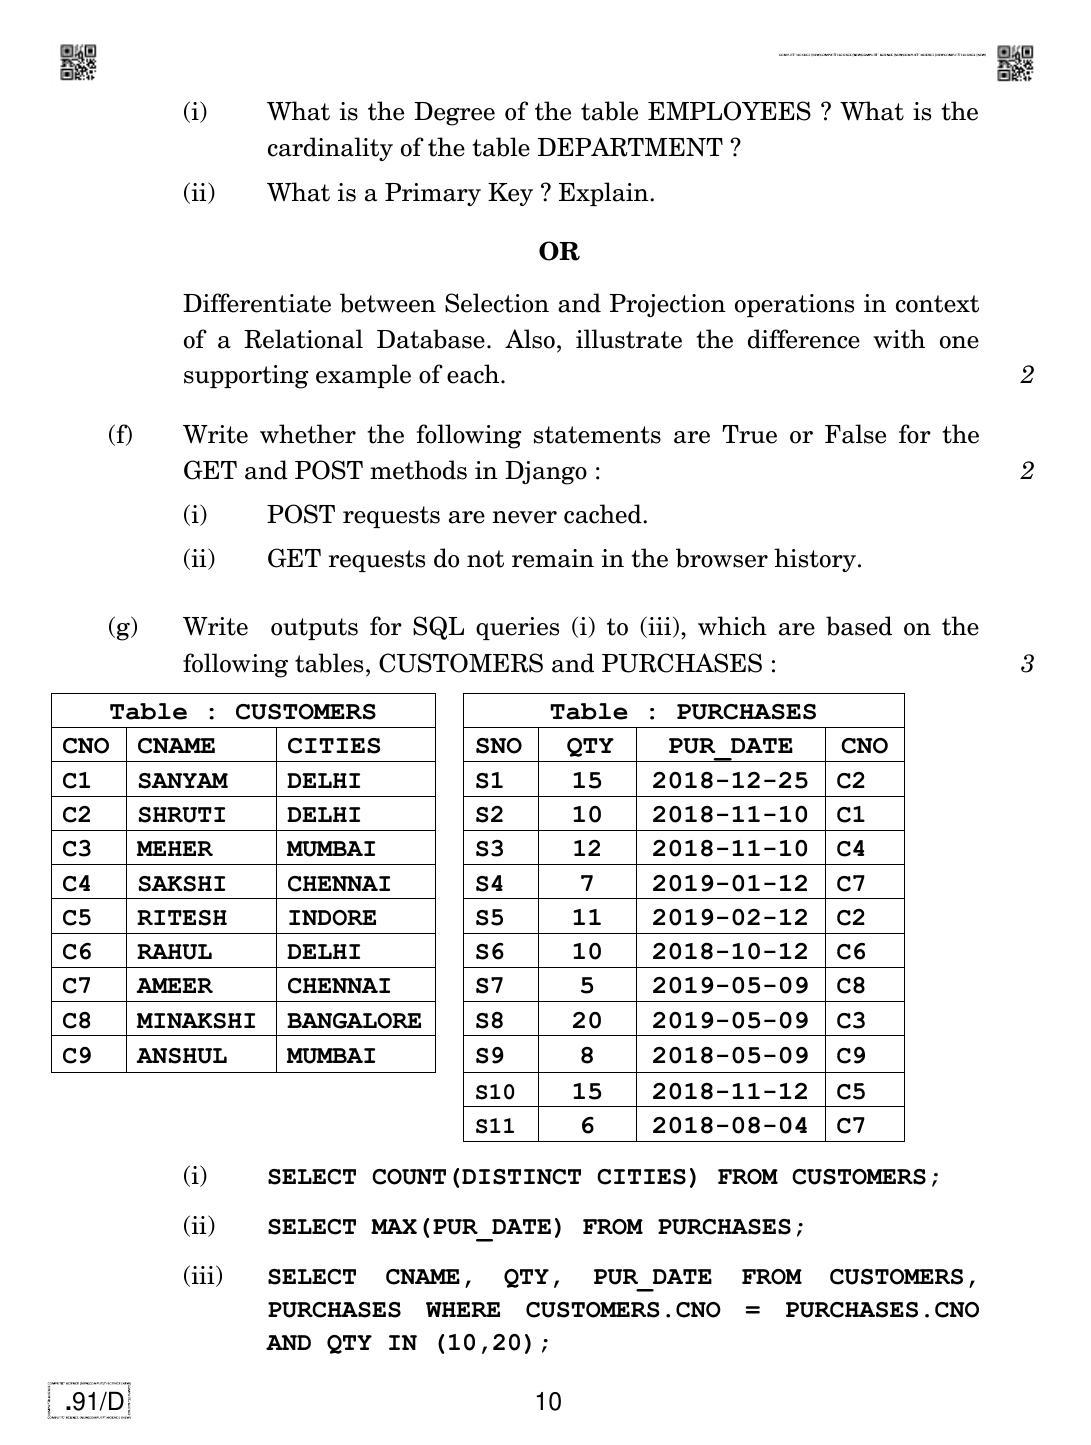 CBSE Class 12 CS 2020 Compartment Question Paper - Page 10